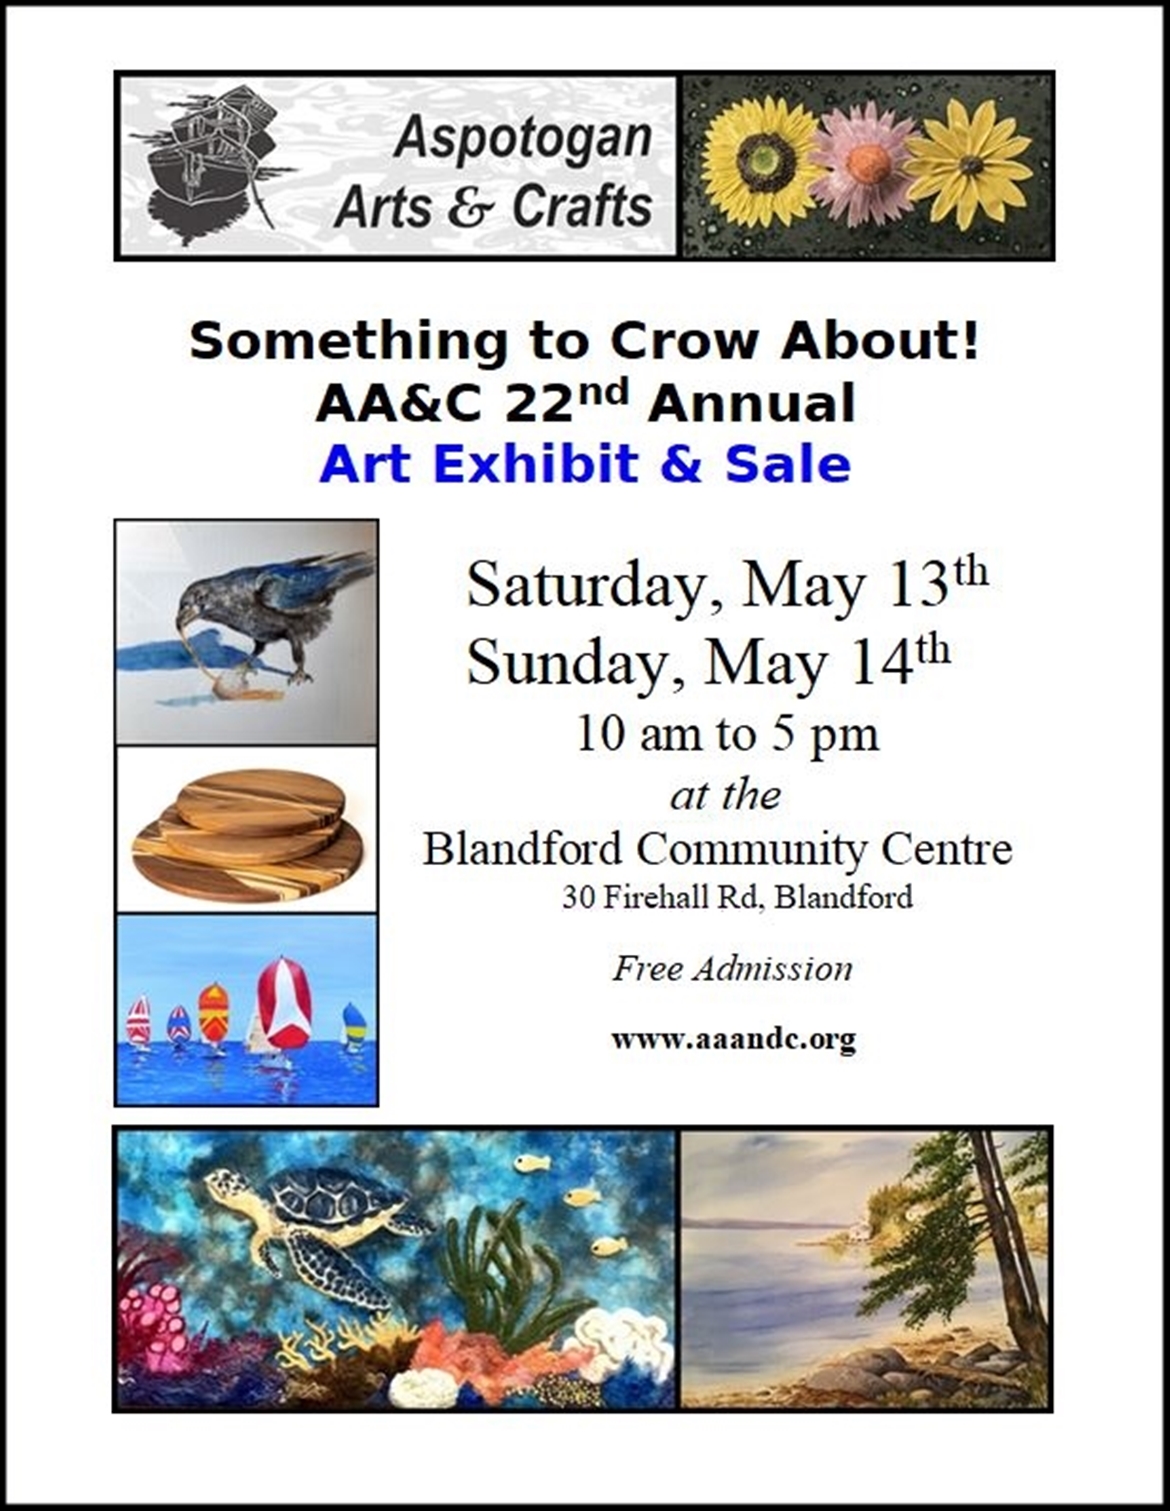 AA&C Annual May Show "Something to Crow About"